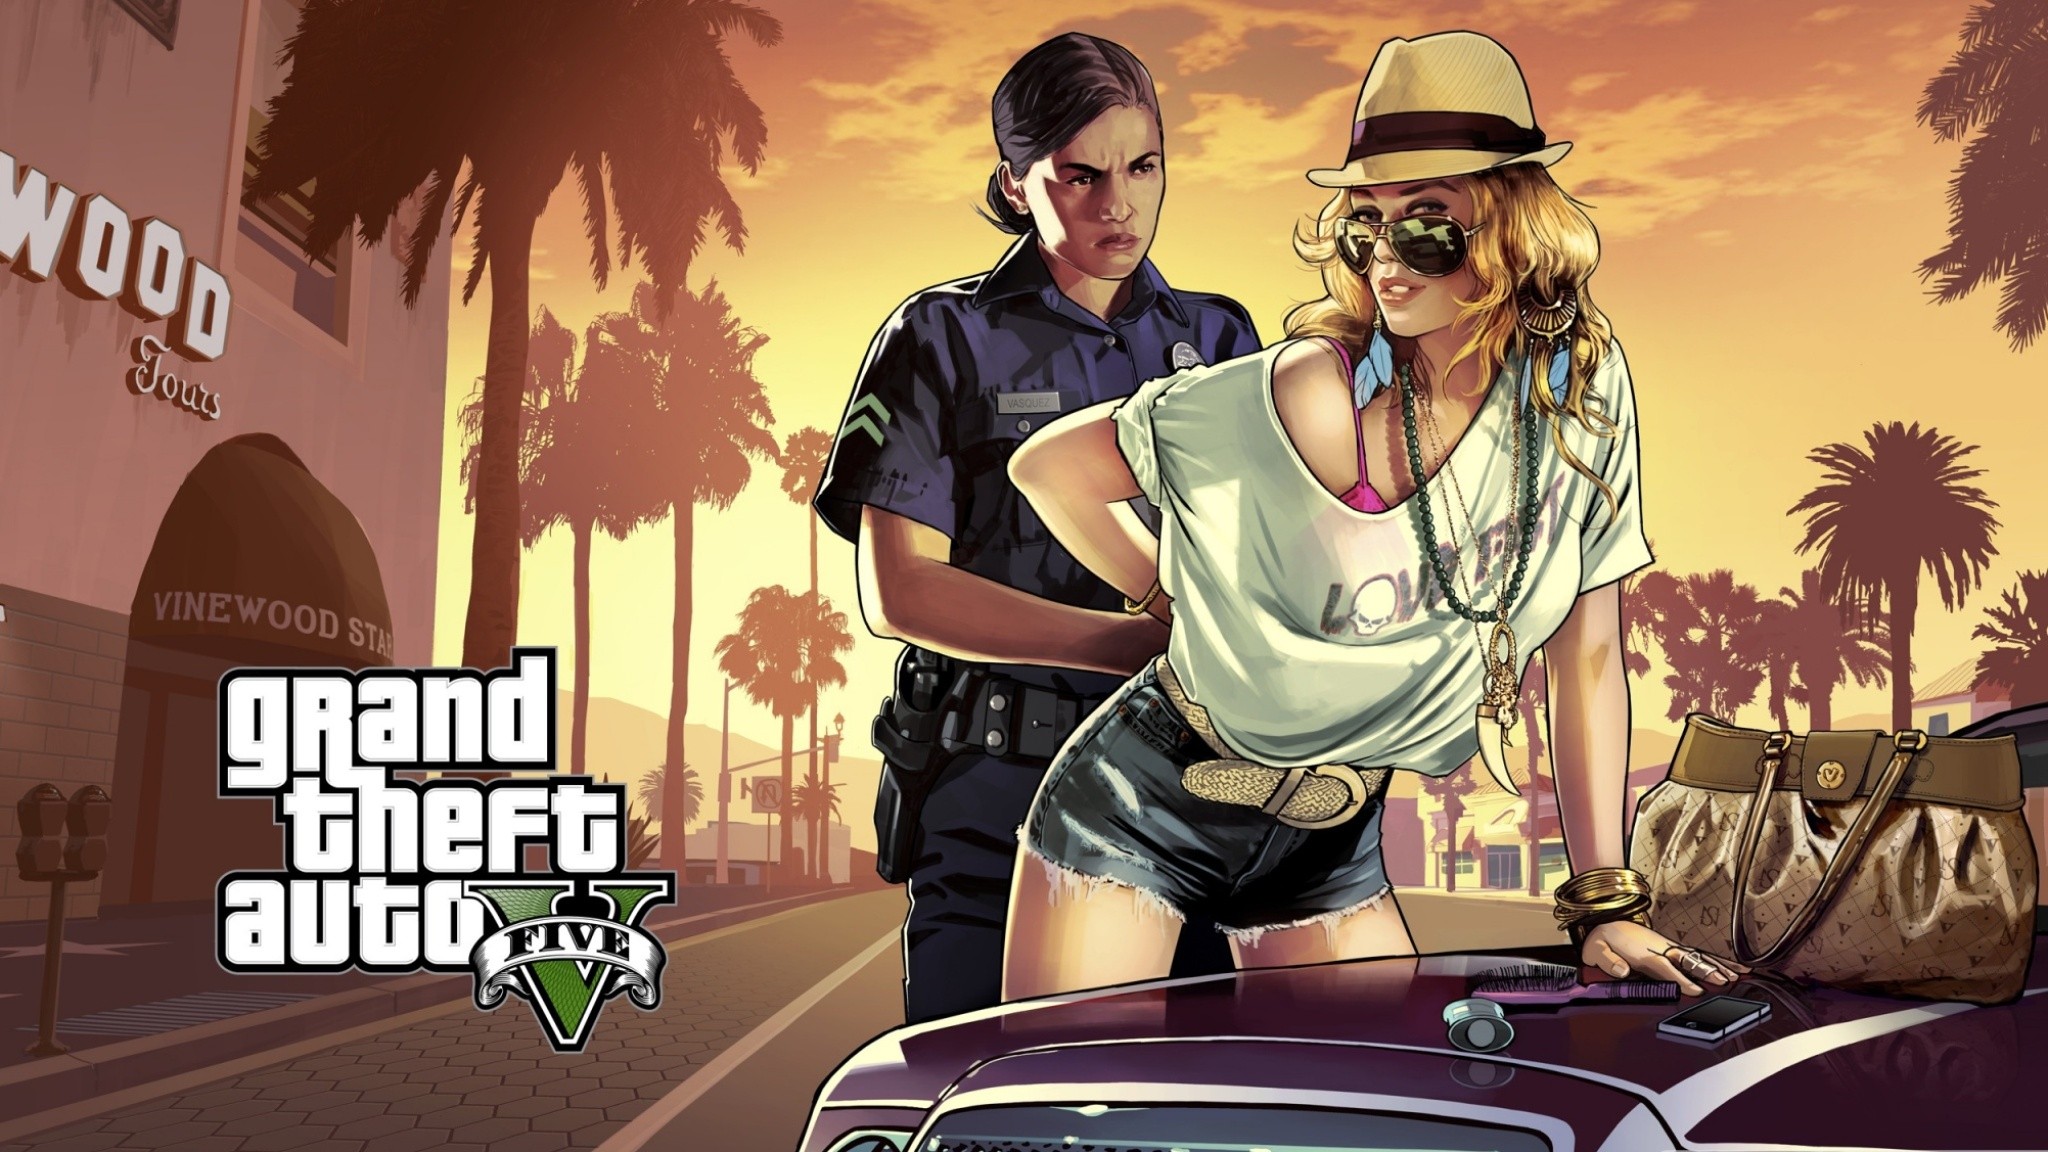 General 2048x1152 Grand Theft Auto V Rockstar Games video games women police car hat video game art police women women with hats two women PC gaming video game girls